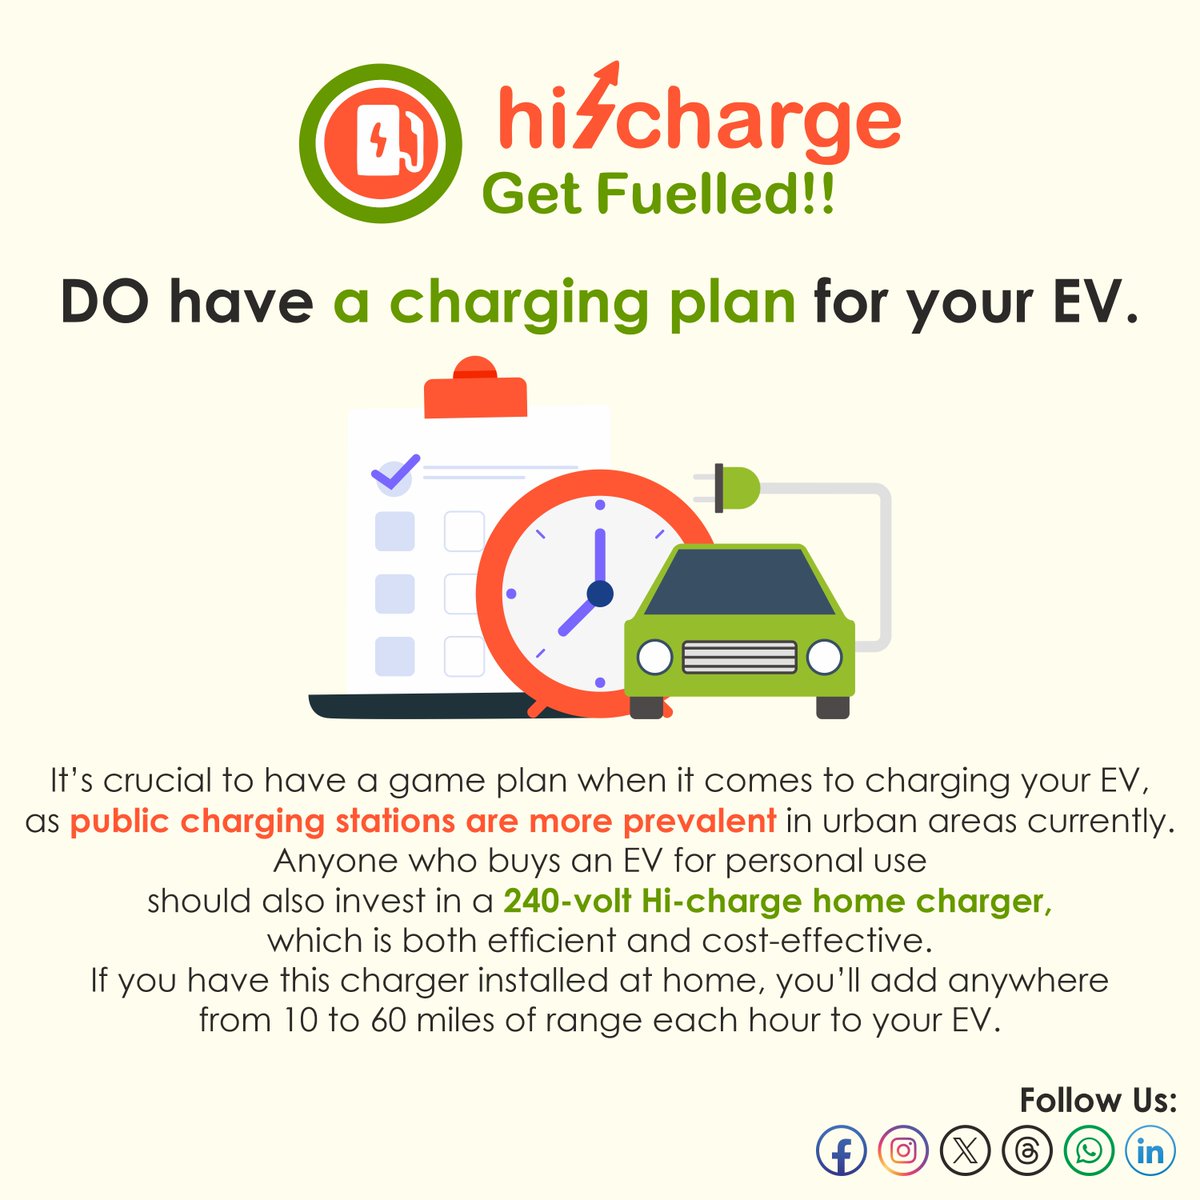 Do Have a CHARGING PLAN for your Electric Vehicle

Click on the link in the description to contact us

#charging #chargingbull #chargingstation #chargingbatteries #chargingcable #chargingport #Chargingcrystals #chargingstations #chargingcase #chargingdock #chargingpad